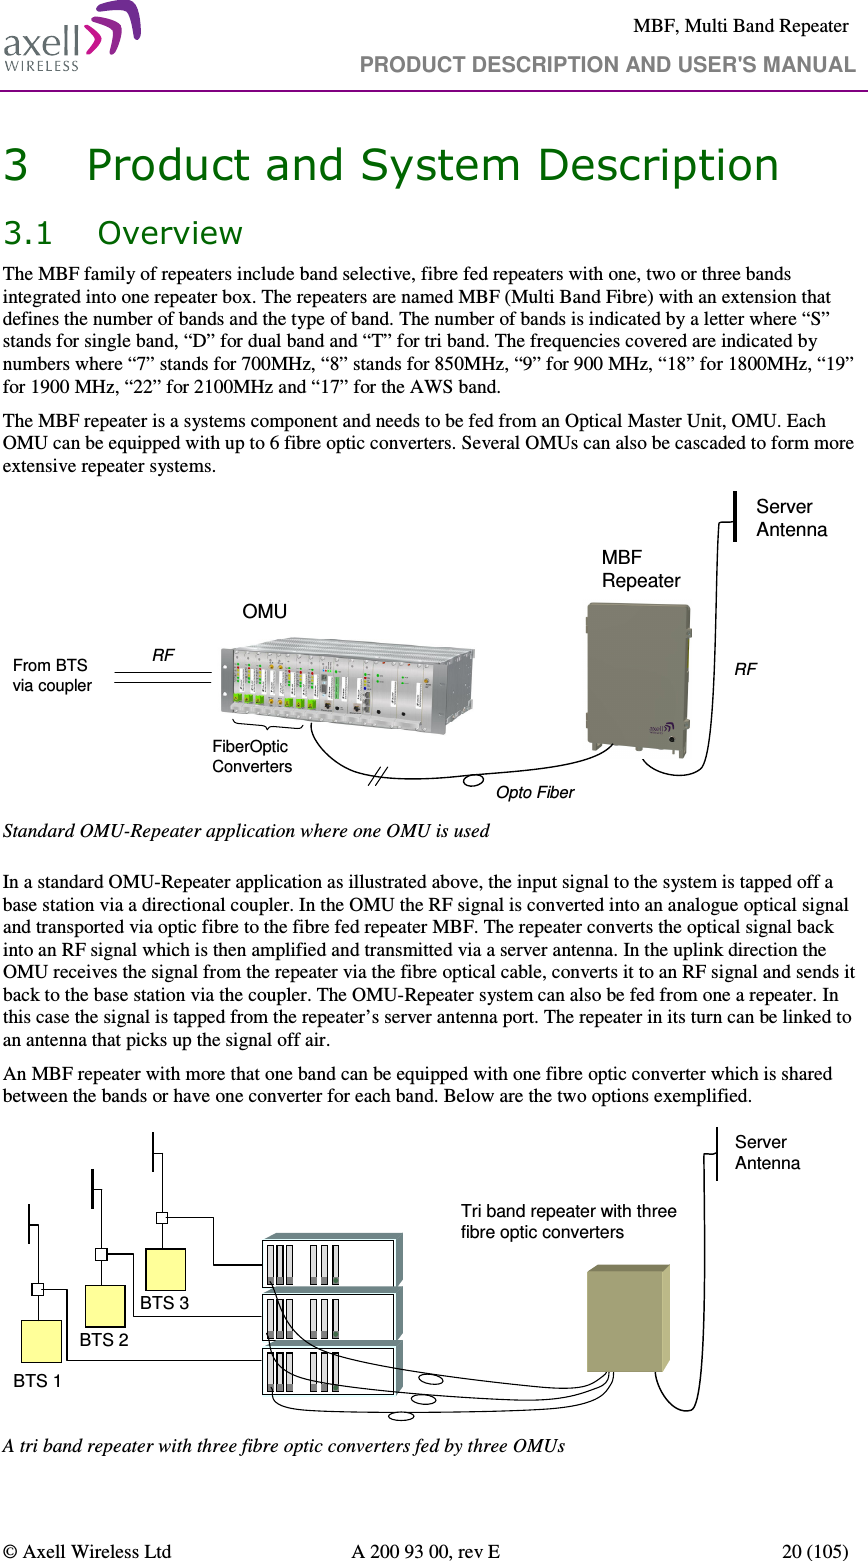     MBF, Multi Band Repeater                                     PRODUCT DESCRIPTION AND USER&apos;S MANUAL   © Axell Wireless Ltd  A 200 93 00, rev E  20 (105)  3 Product and System Description  3.1 Overview The MBF family of repeaters include band selective, fibre fed repeaters with one, two or three bands integrated into one repeater box. The repeaters are named MBF (Multi Band Fibre) with an extension that defines the number of bands and the type of band. The number of bands is indicated by a letter where “S” stands for single band, “D” for dual band and “T” for tri band. The frequencies covered are indicated by numbers where “7” stands for 700MHz, “8” stands for 850MHz, “9” for 900 MHz, “18” for 1800MHz, “19” for 1900 MHz, “22” for 2100MHz and “17” for the AWS band. The MBF repeater is a systems component and needs to be fed from an Optical Master Unit, OMU. Each OMU can be equipped with up to 6 fibre optic converters. Several OMUs can also be cascaded to form more extensive repeater systems.  RFMBF RepeaterOpto FiberRFFiberOpticConvertersServer AntennaFrom BTS via couplerOMU Standard OMU-Repeater application where one OMU is used  In a standard OMU-Repeater application as illustrated above, the input signal to the system is tapped off a base station via a directional coupler. In the OMU the RF signal is converted into an analogue optical signal and transported via optic fibre to the fibre fed repeater MBF. The repeater converts the optical signal back into an RF signal which is then amplified and transmitted via a server antenna. In the uplink direction the OMU receives the signal from the repeater via the fibre optical cable, converts it to an RF signal and sends it back to the base station via the coupler. The OMU-Repeater system can also be fed from one a repeater. In this case the signal is tapped from the repeater’s server antenna port. The repeater in its turn can be linked to an antenna that picks up the signal off air. An MBF repeater with more that one band can be equipped with one fibre optic converter which is shared between the bands or have one converter for each band. Below are the two options exemplified. BTS 1BTS 2BTS 3Tri band repeater with three fibre optic convertersServer Antenna A tri band repeater with three fibre optic converters fed by three OMUs 